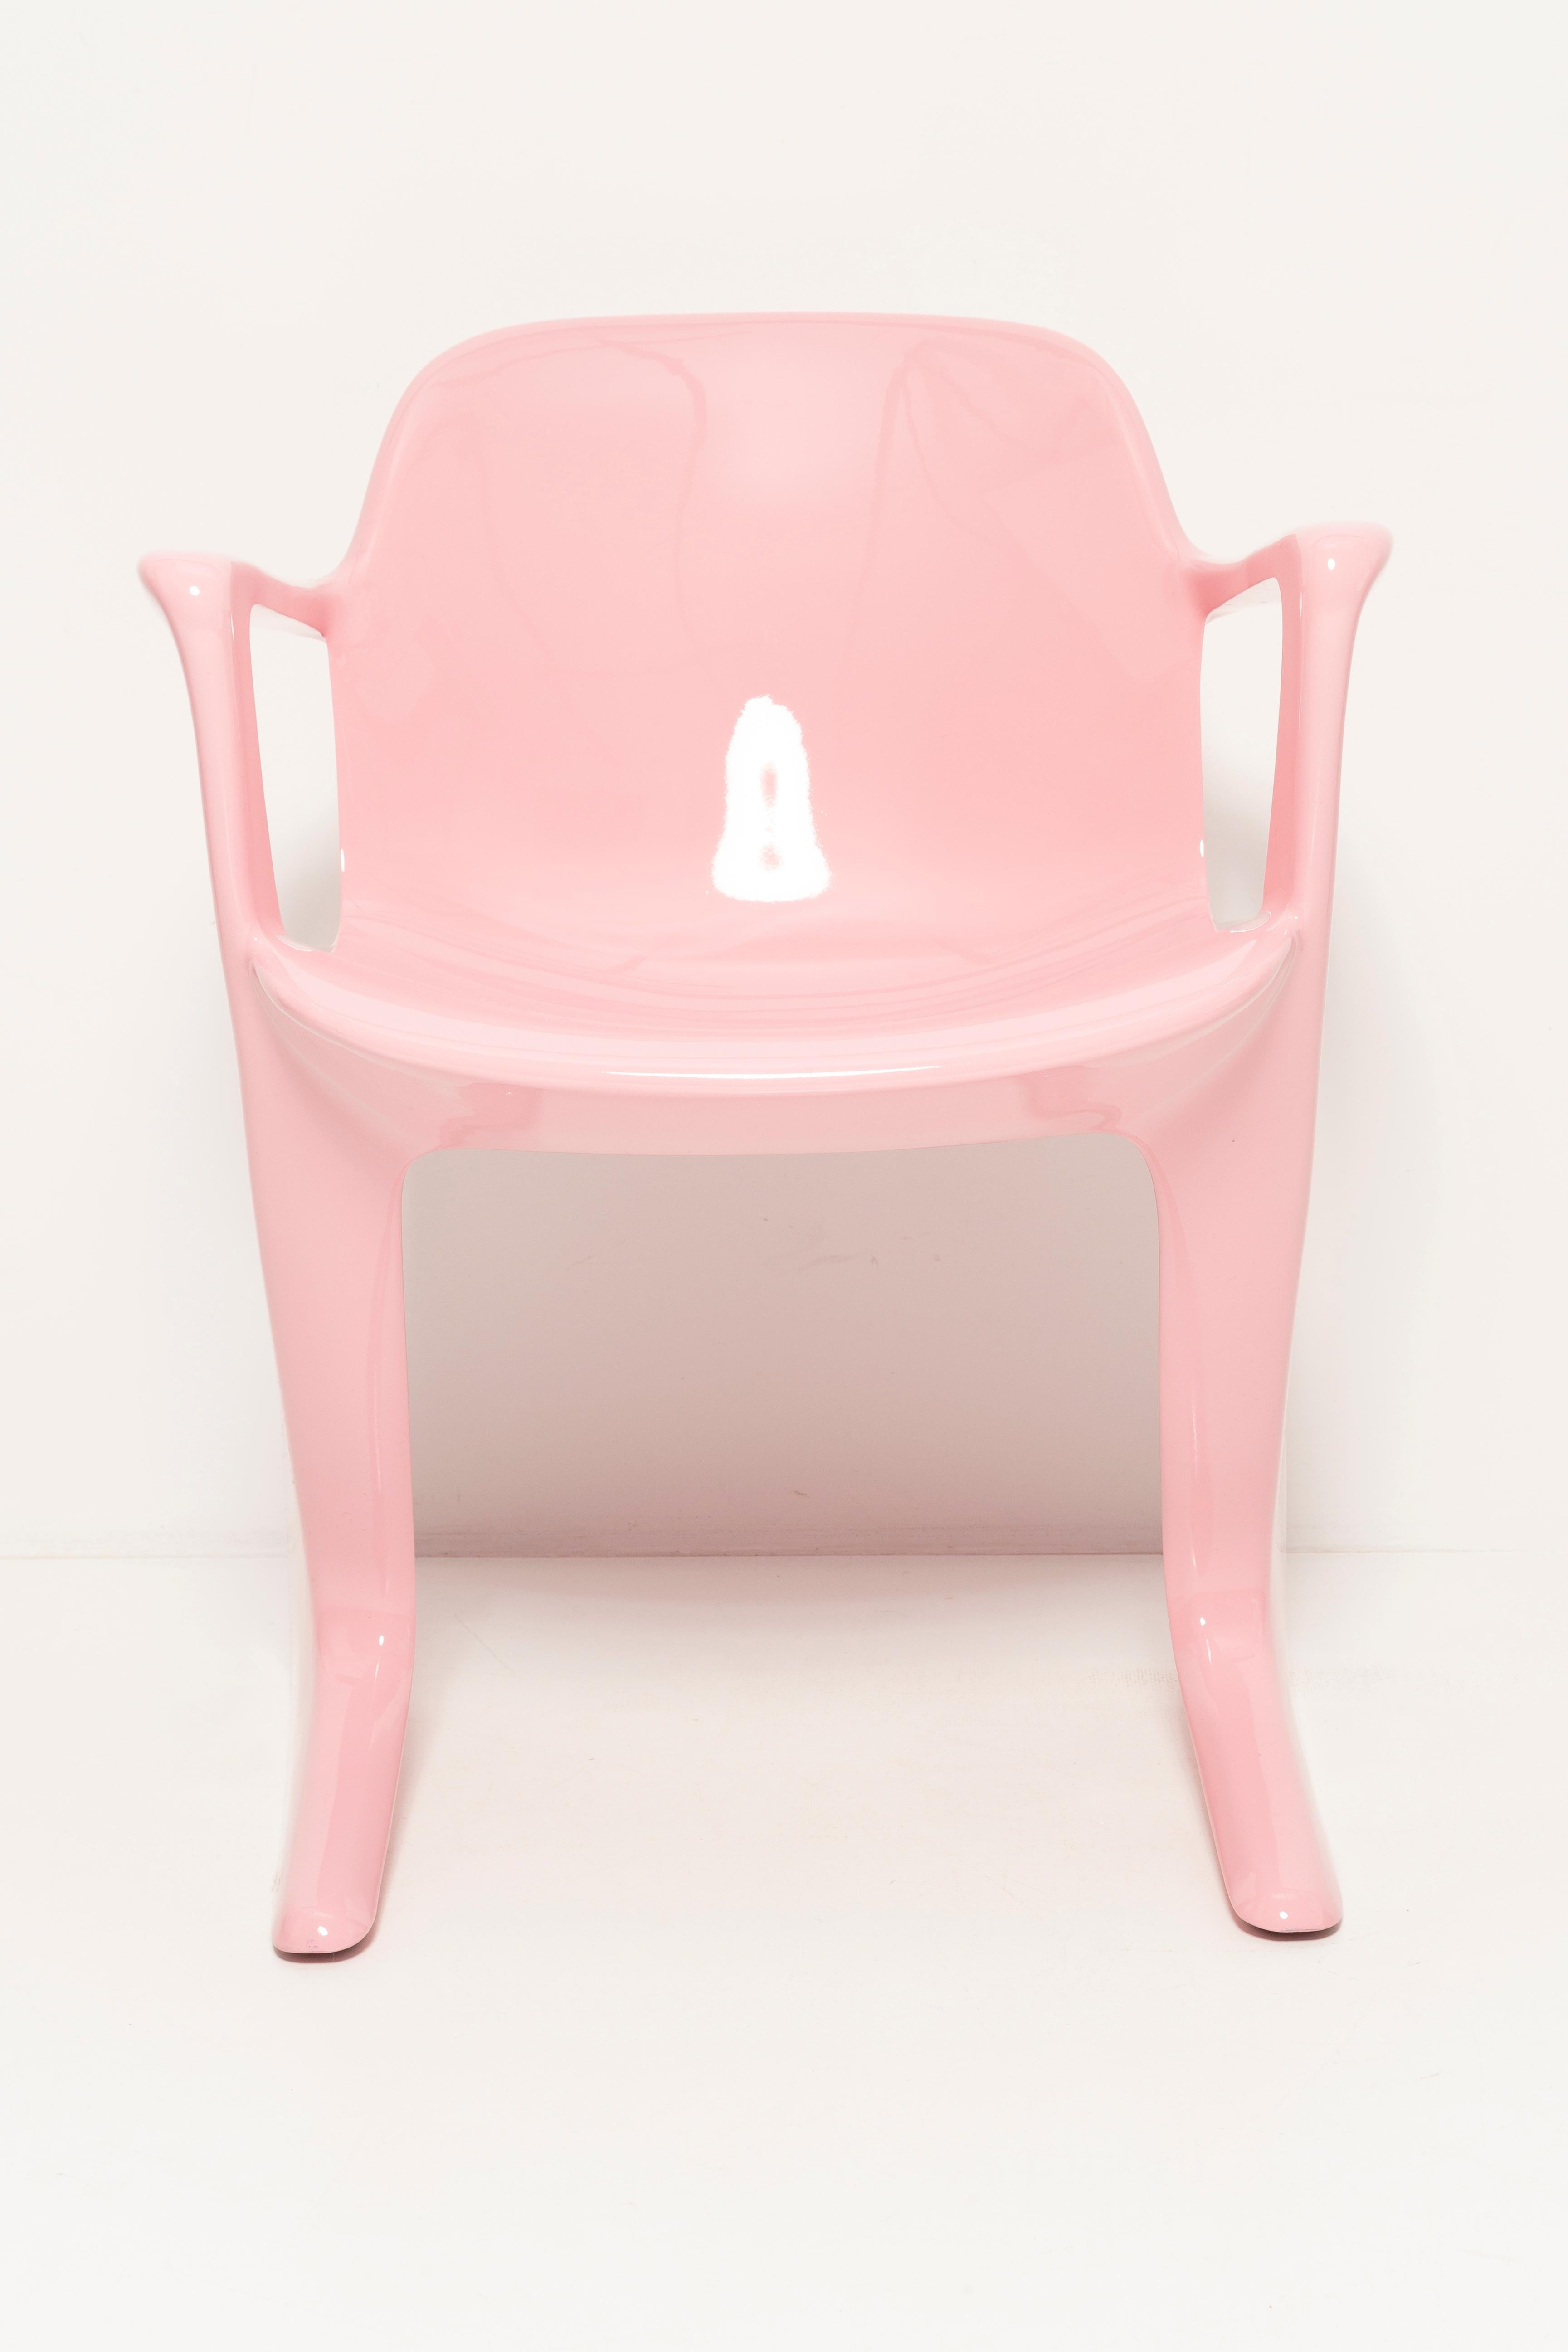 Mid-Century Light Pink Kangaroo Chair Designed by Ernst Moeckl, Germany, 1968 For Sale 4